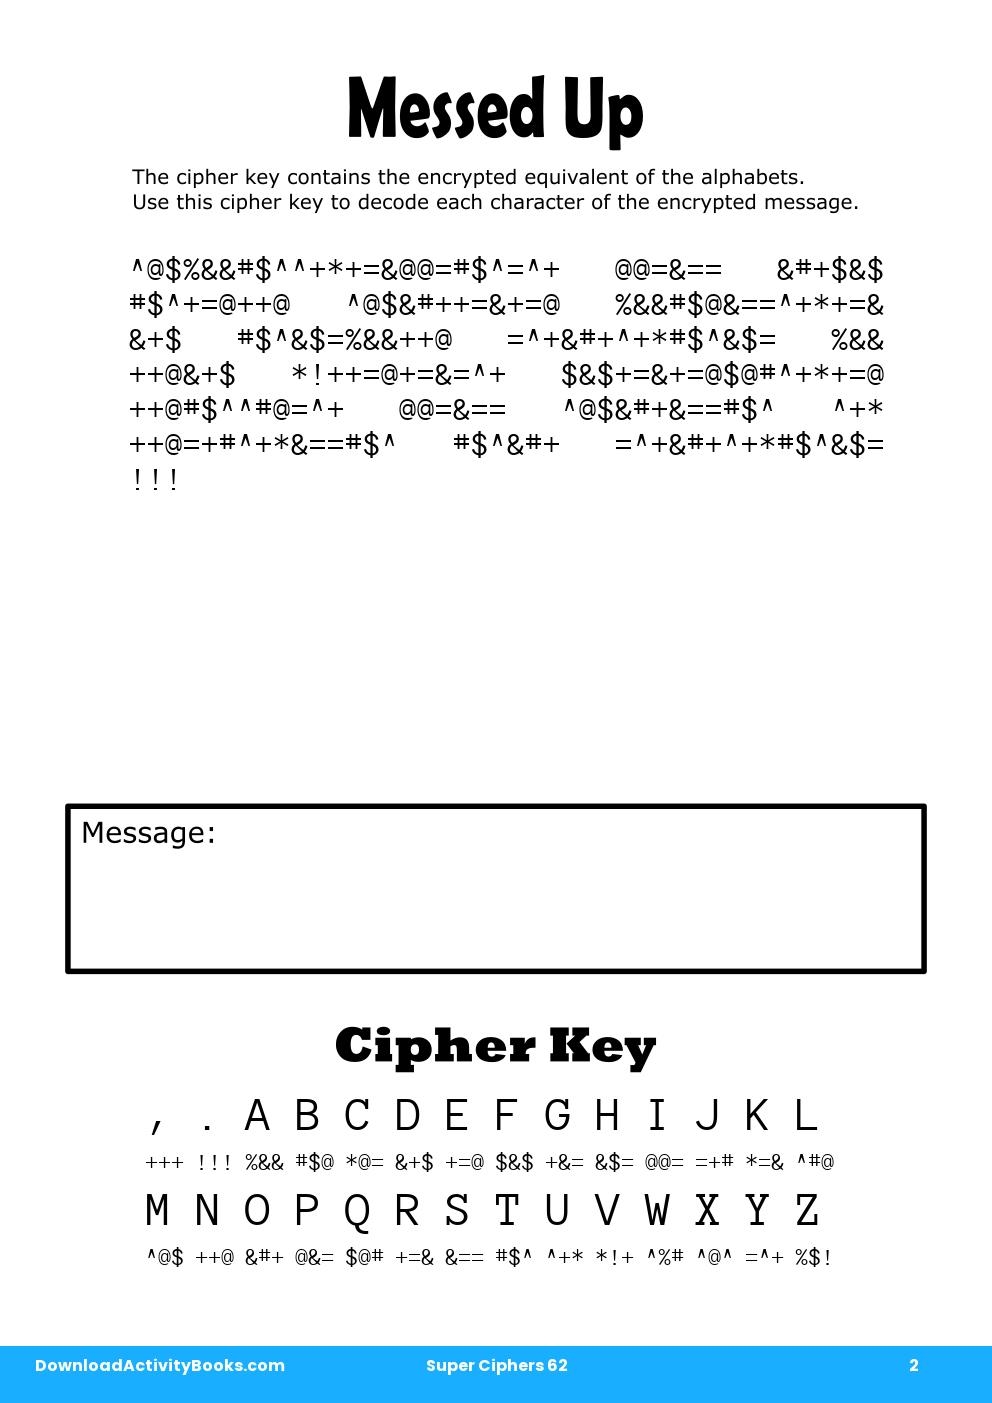 Messed Up in Super Ciphers 62